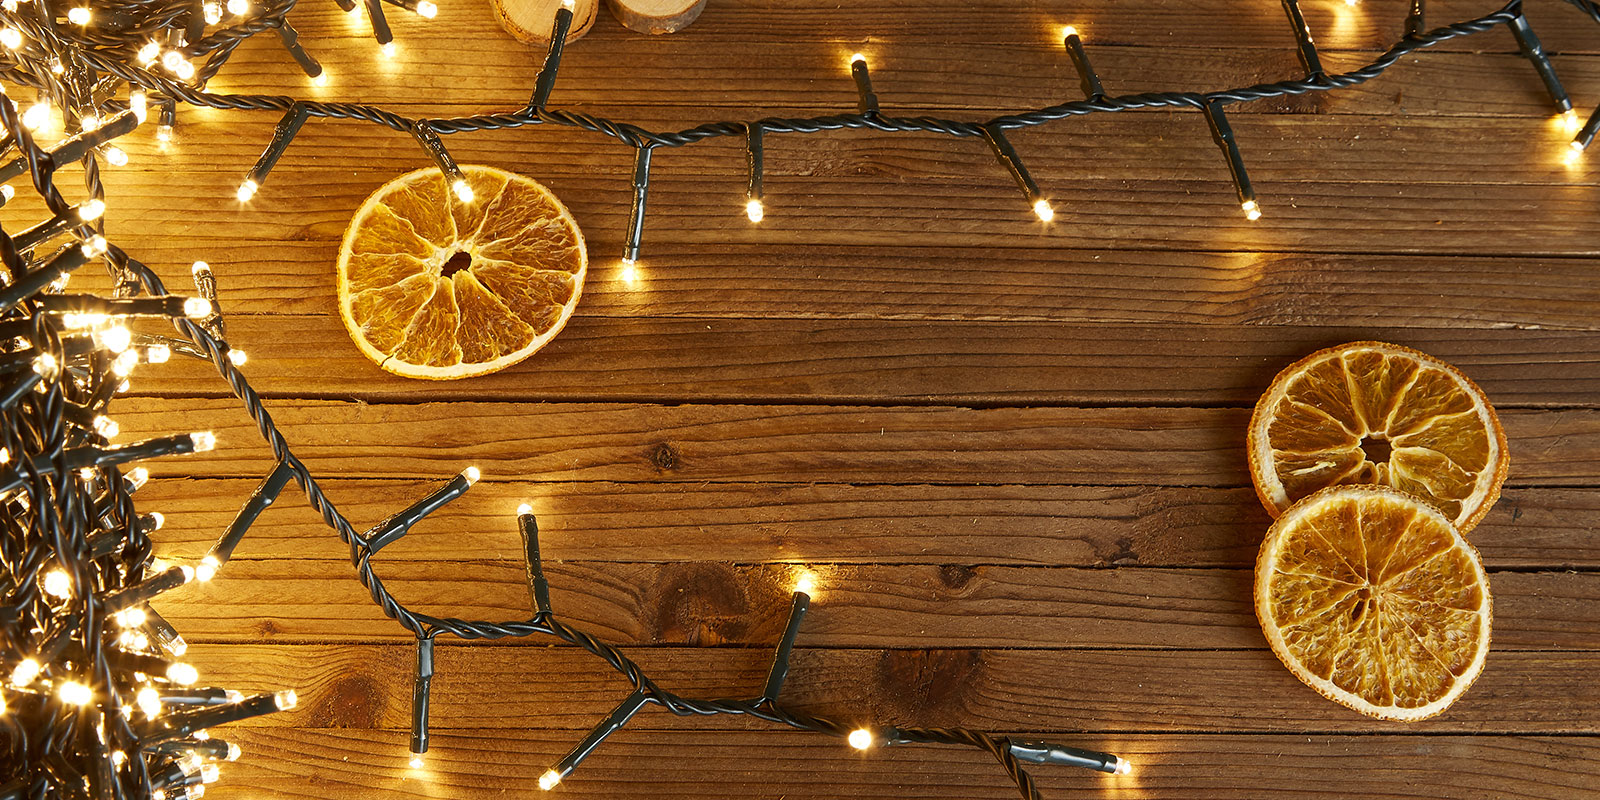 Your Guide to Buying Outdoor Christmas Lights